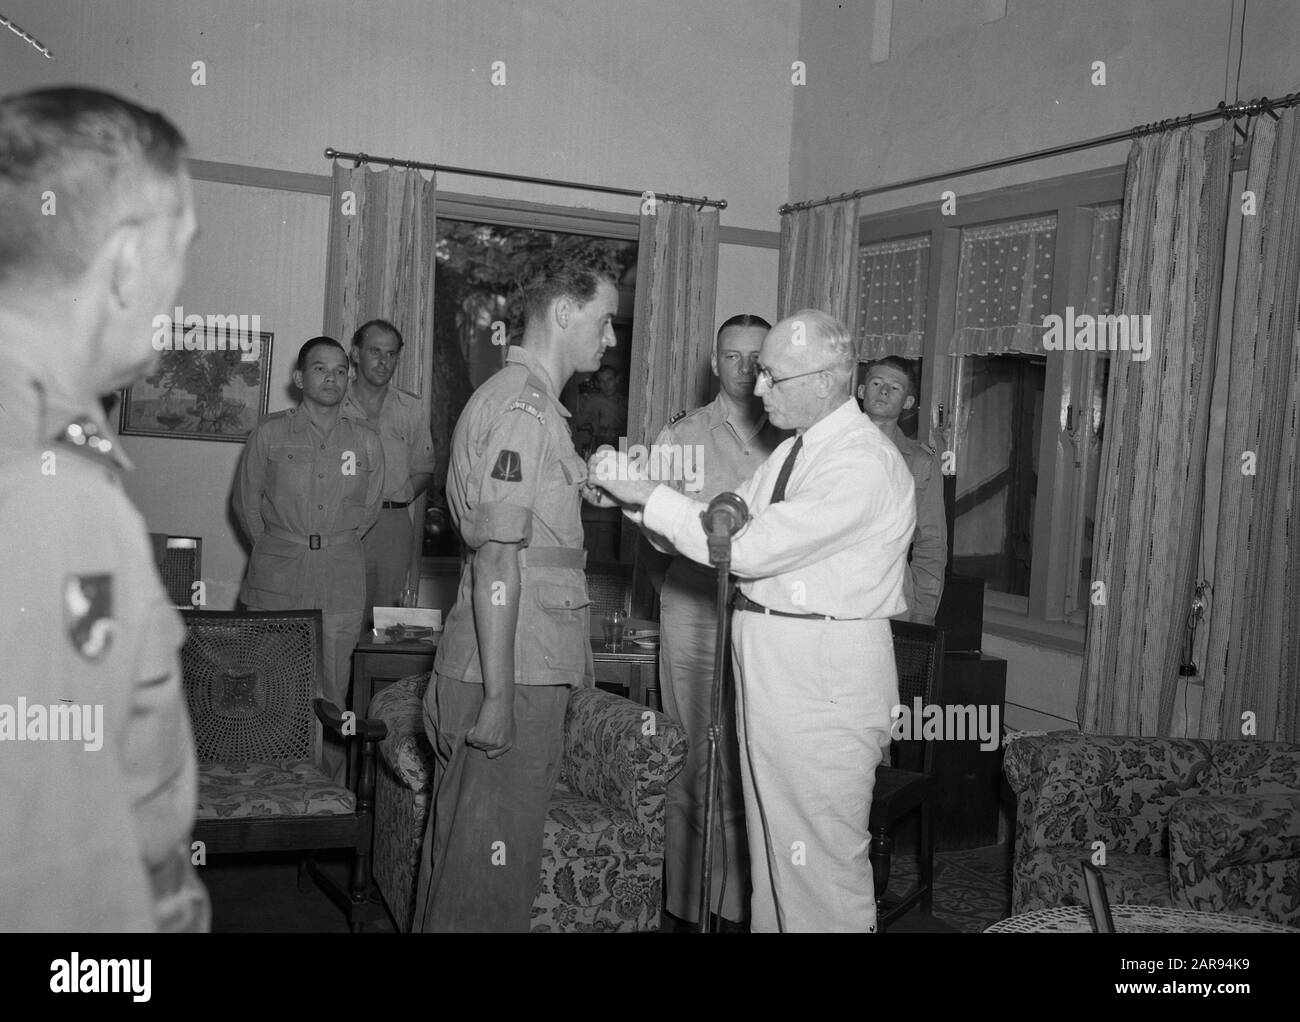 Medal of Freedom Award to Major Bensen  Award of the Medal of Freedom to Major Guillaume Bensen (left) by American consul-general Walter C. Foote ( right) Date: June 20, 1947 Location: Indonesia, Dutch East Indies Stock Photo